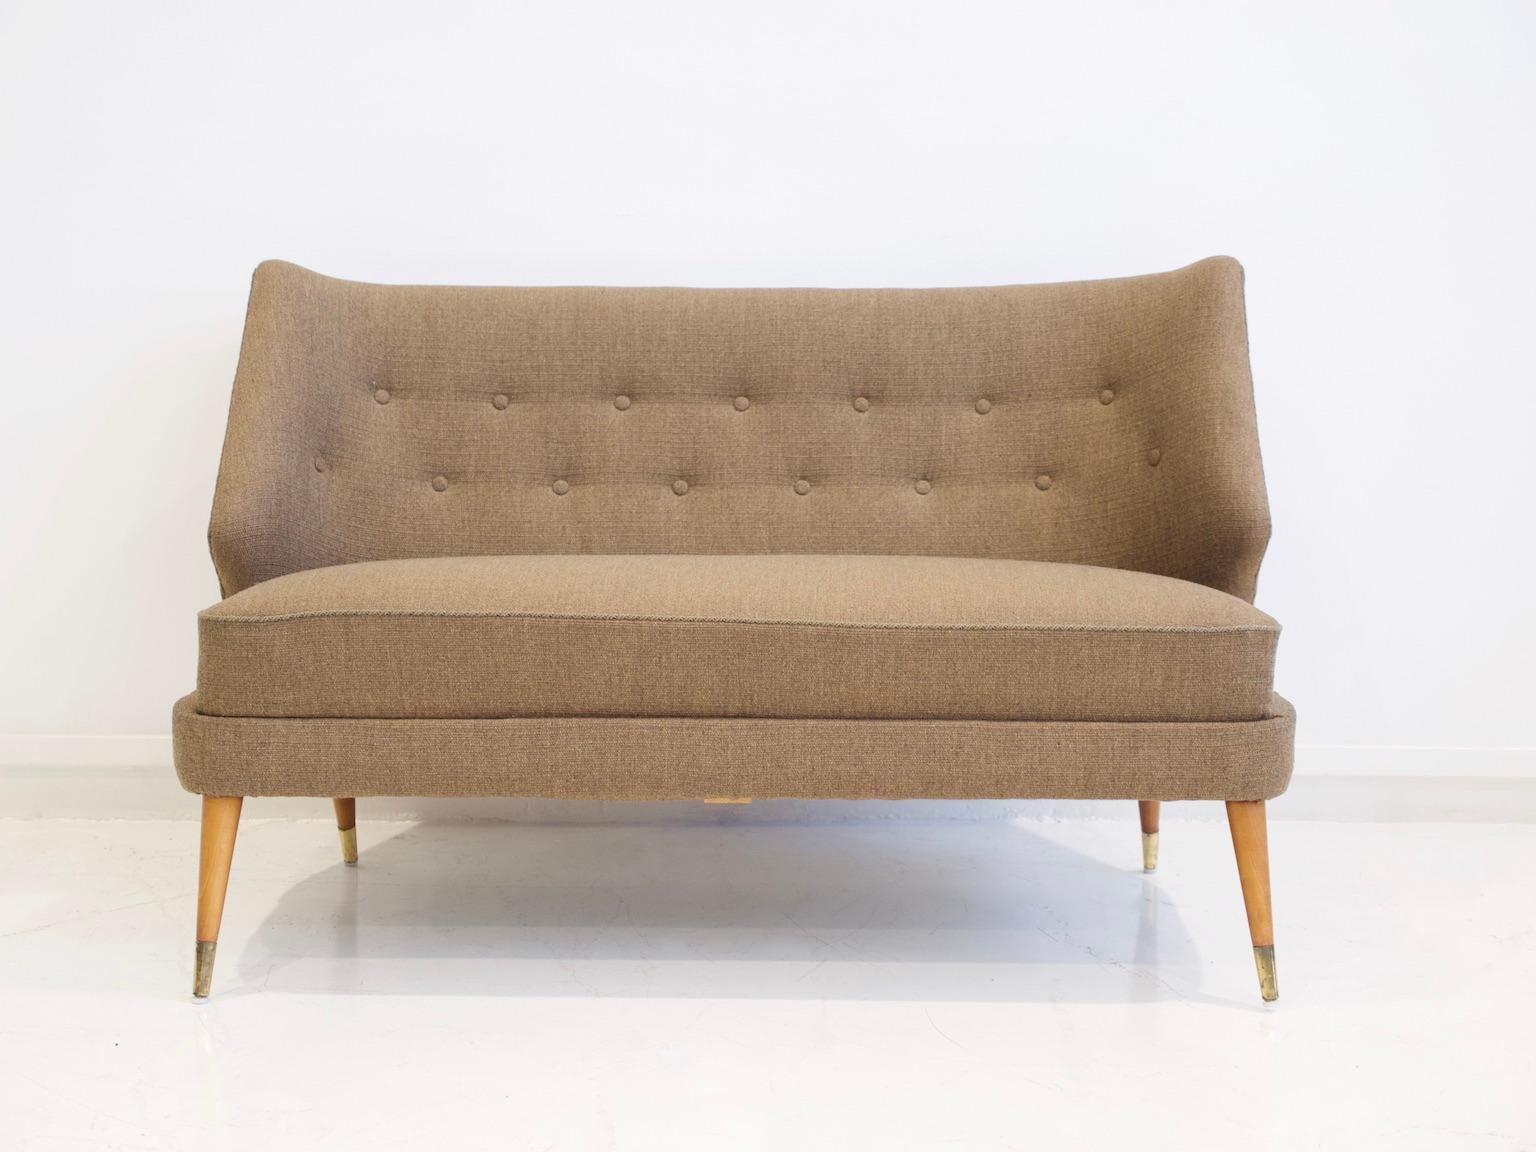 Mid-20th century sofa with beautifully curved button tufted back. Upholstered in light brown wool, stained beech legs with brass finish. Designed by Arne Wahl Iversen.